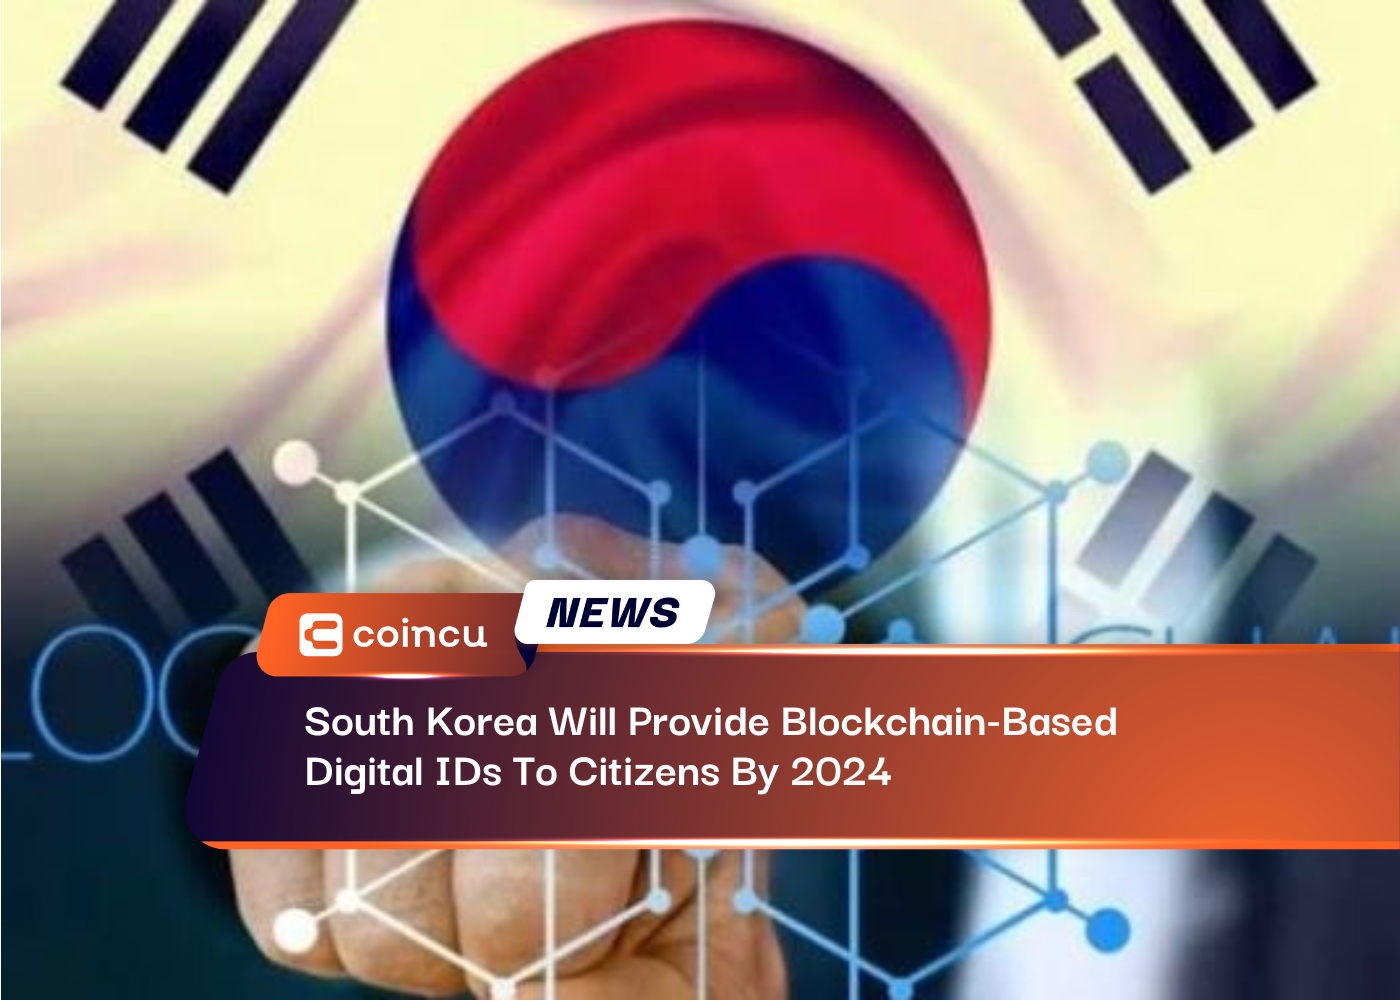 South Korea Will Provide Blockchain-Based Digital IDs To Citizens By 2024